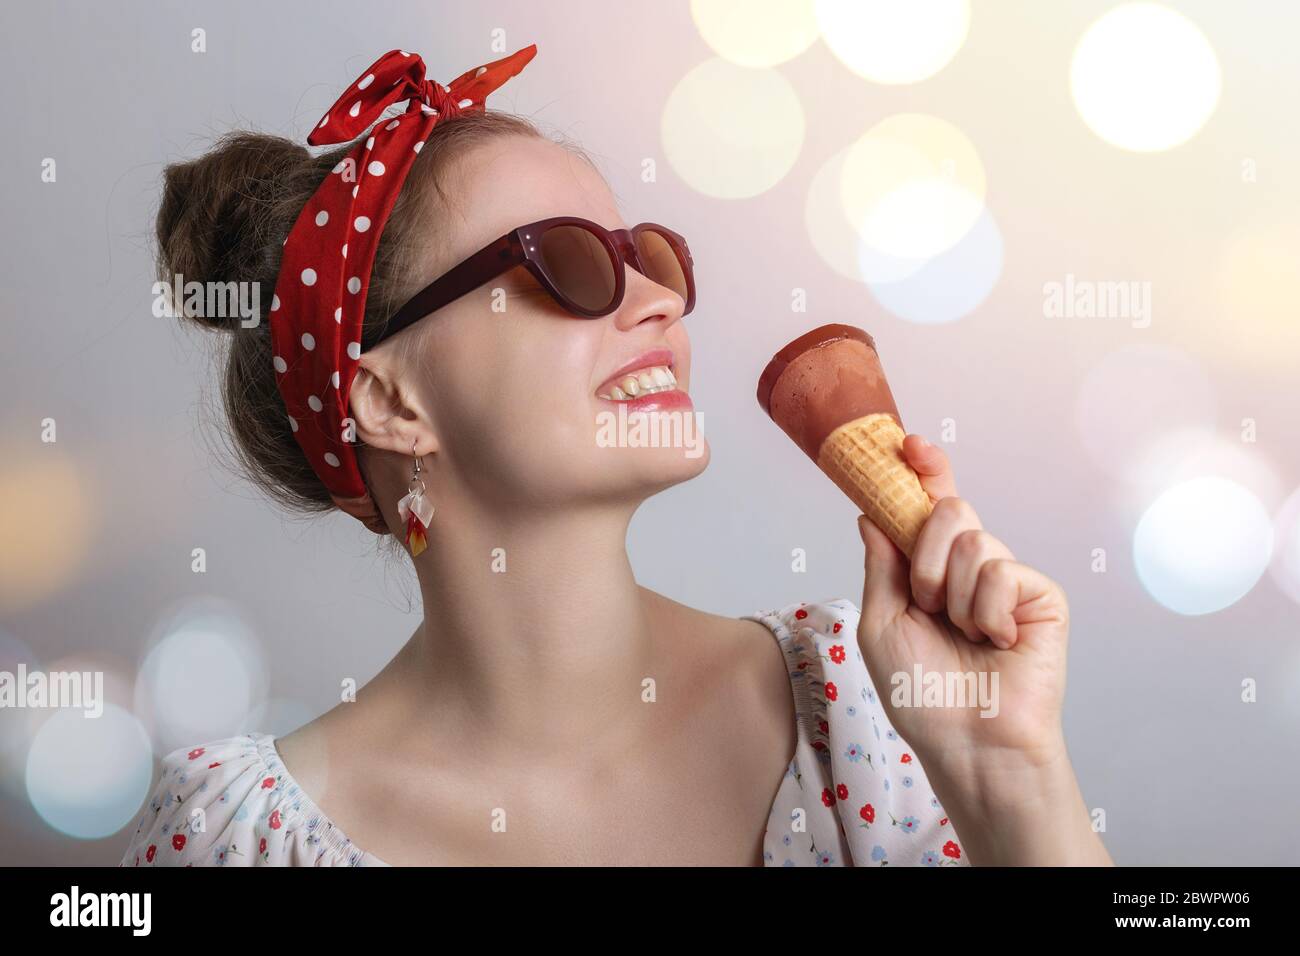 Smiling young Caucasian woman girl wearing sunglasses eating a chocolate ice cream cone. Summer party vibes concept Stock Photo